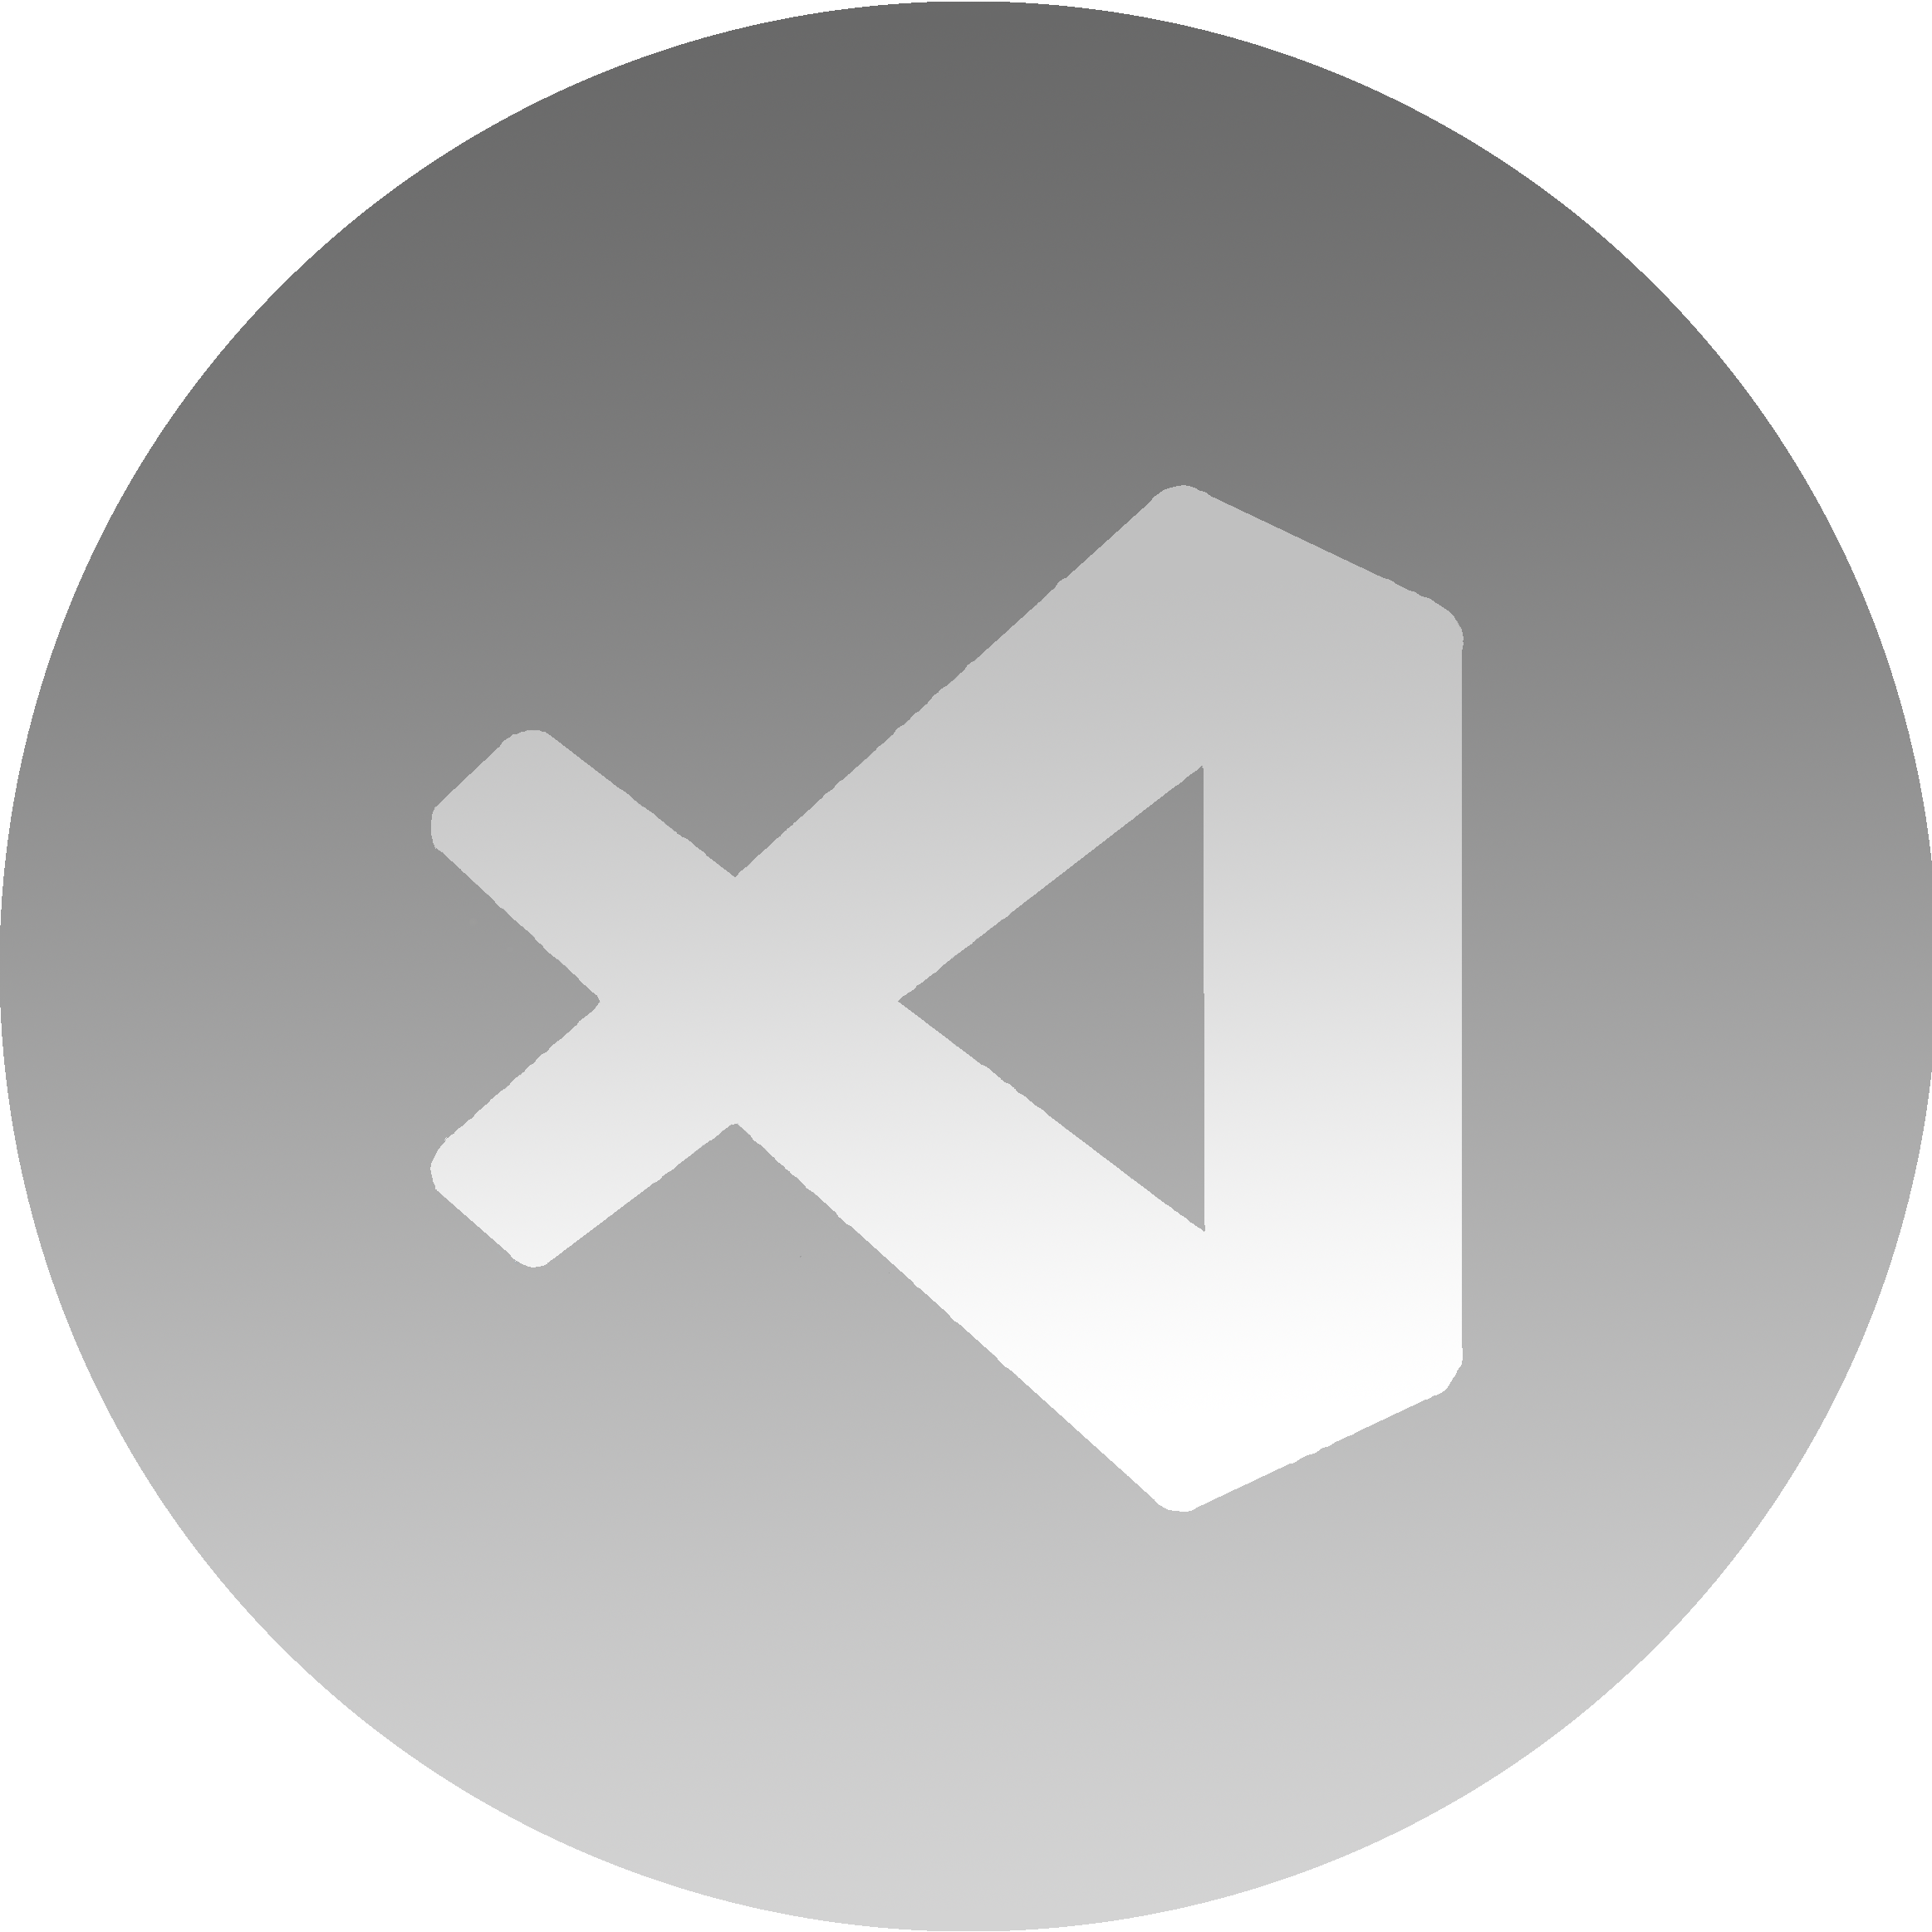 All Gray 0.0.1 Extension for Visual Studio Code